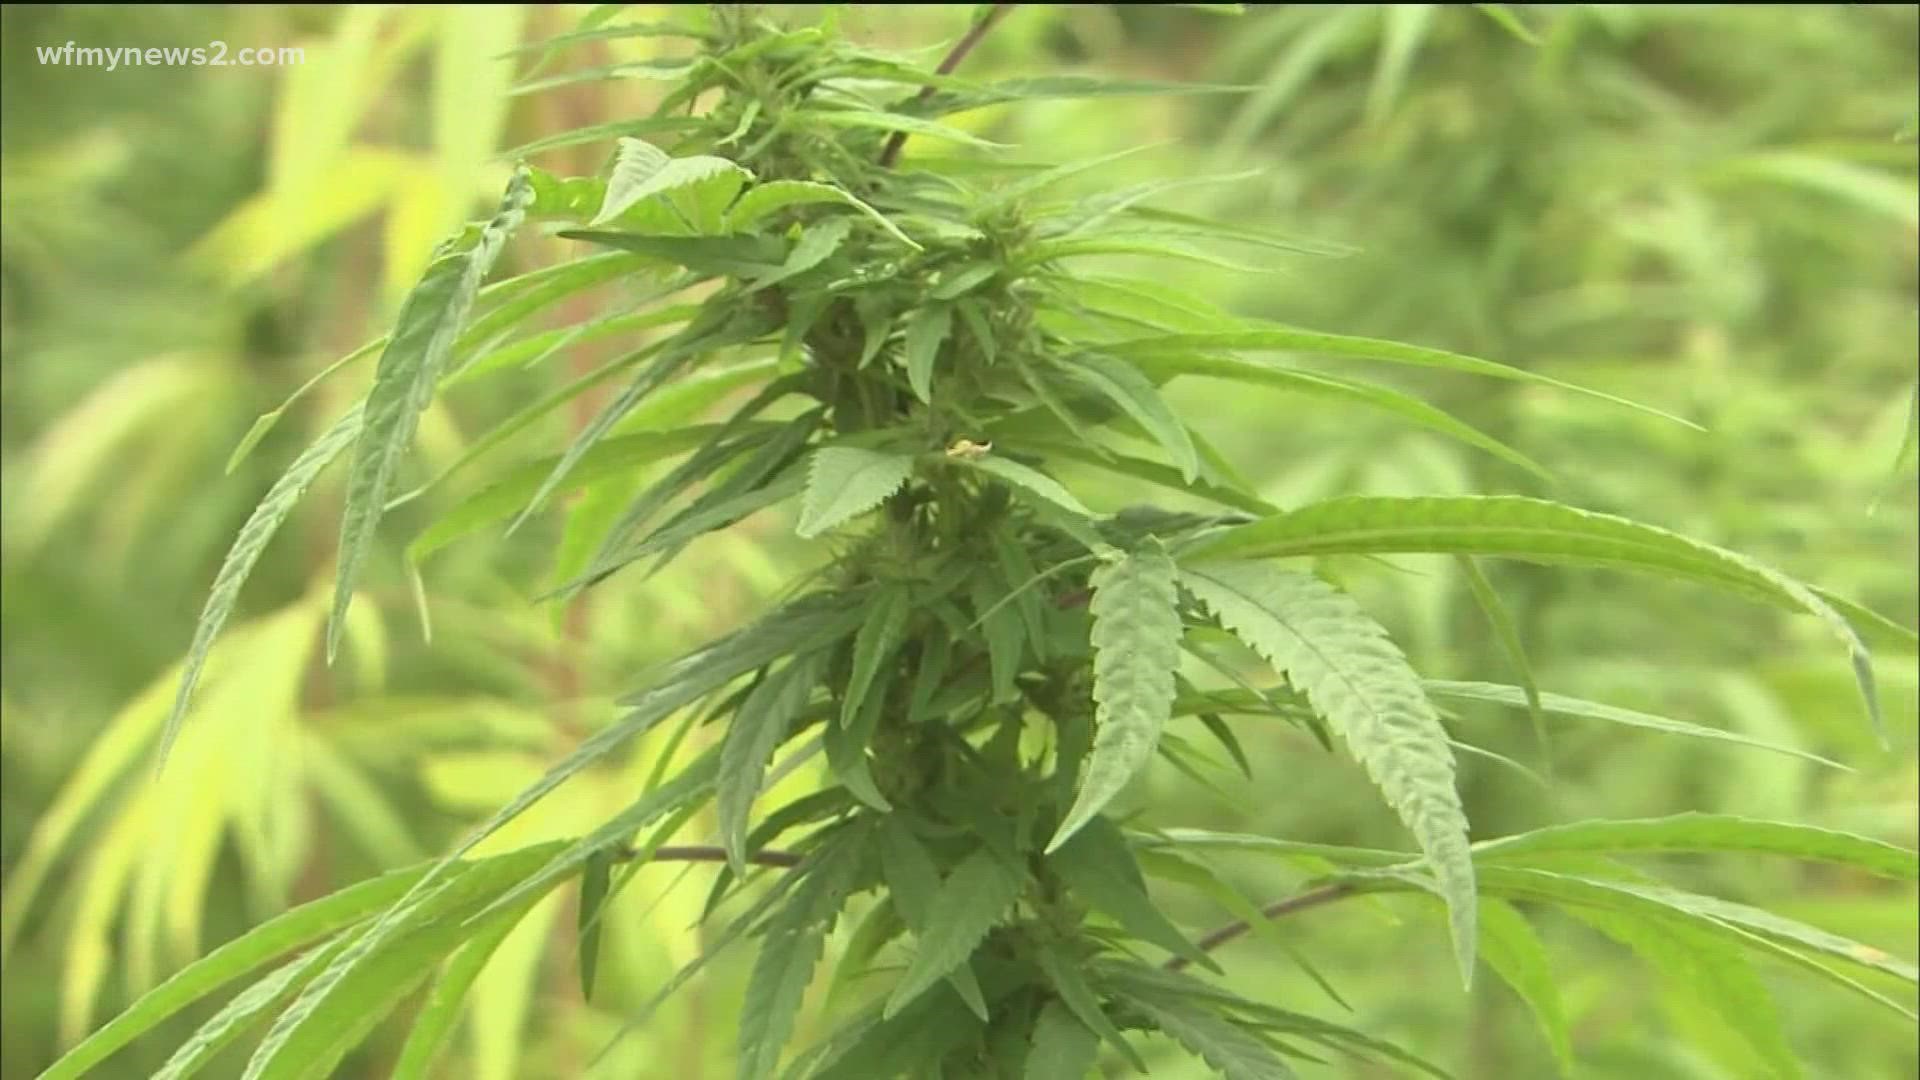 There are thousands of hemp-based products sold across the state but they could soon all become illegal.